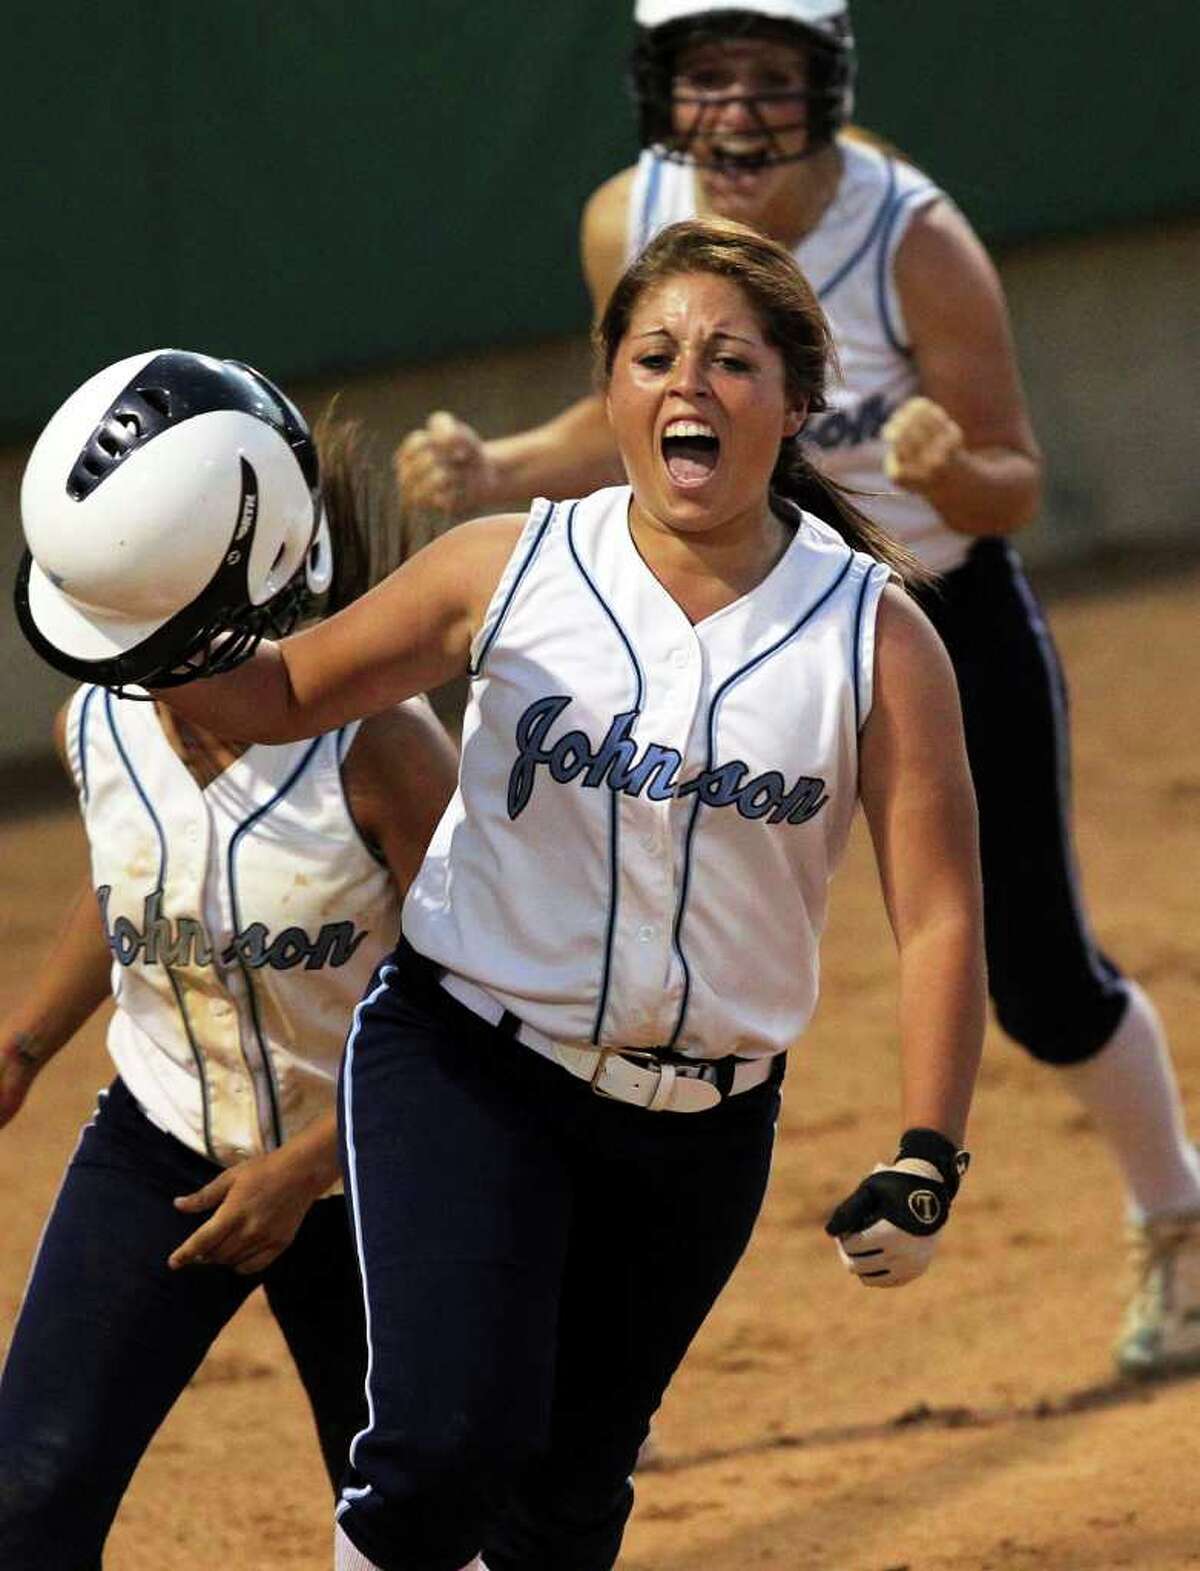 SPORTS Johnson's Geena Garcia runs back to the dugout celebrating after hitting a grand slam home run as her team beats Taft 5-2 during round 2 at Northside Field #2 on May 5, 2011. Tom Reel/Staff